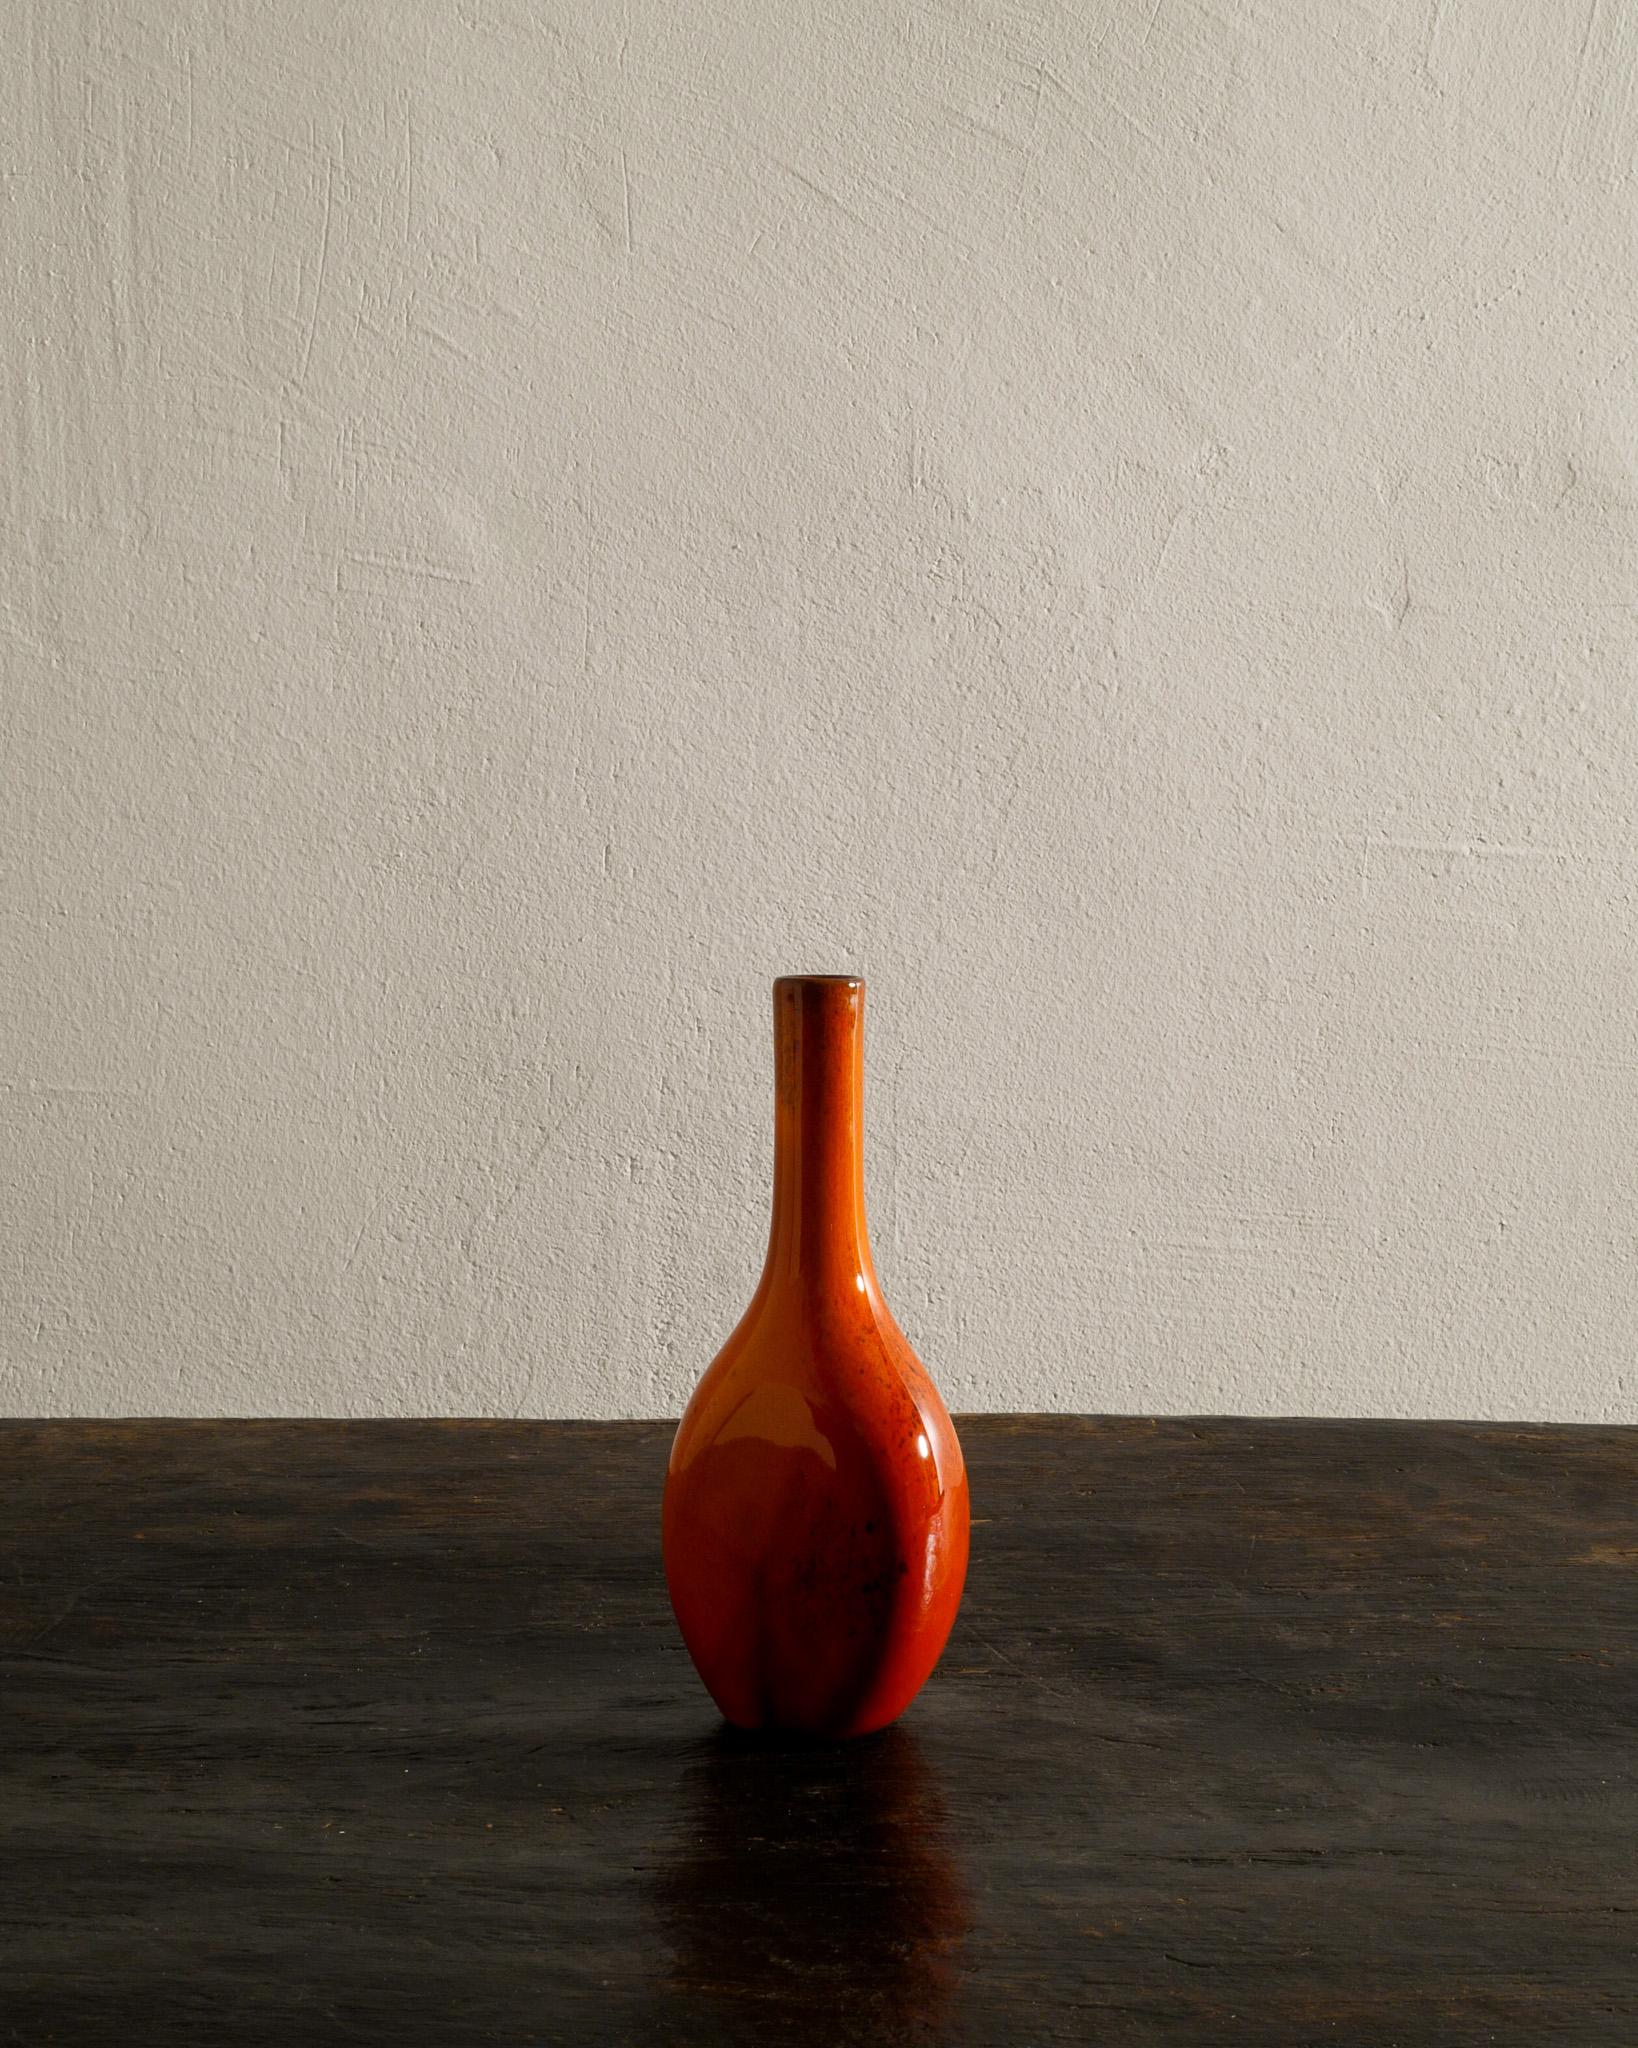 Mid-Century Modern French Mid Century Red Stoneware Ceramic Vase in style of George Jouve, 1950s For Sale